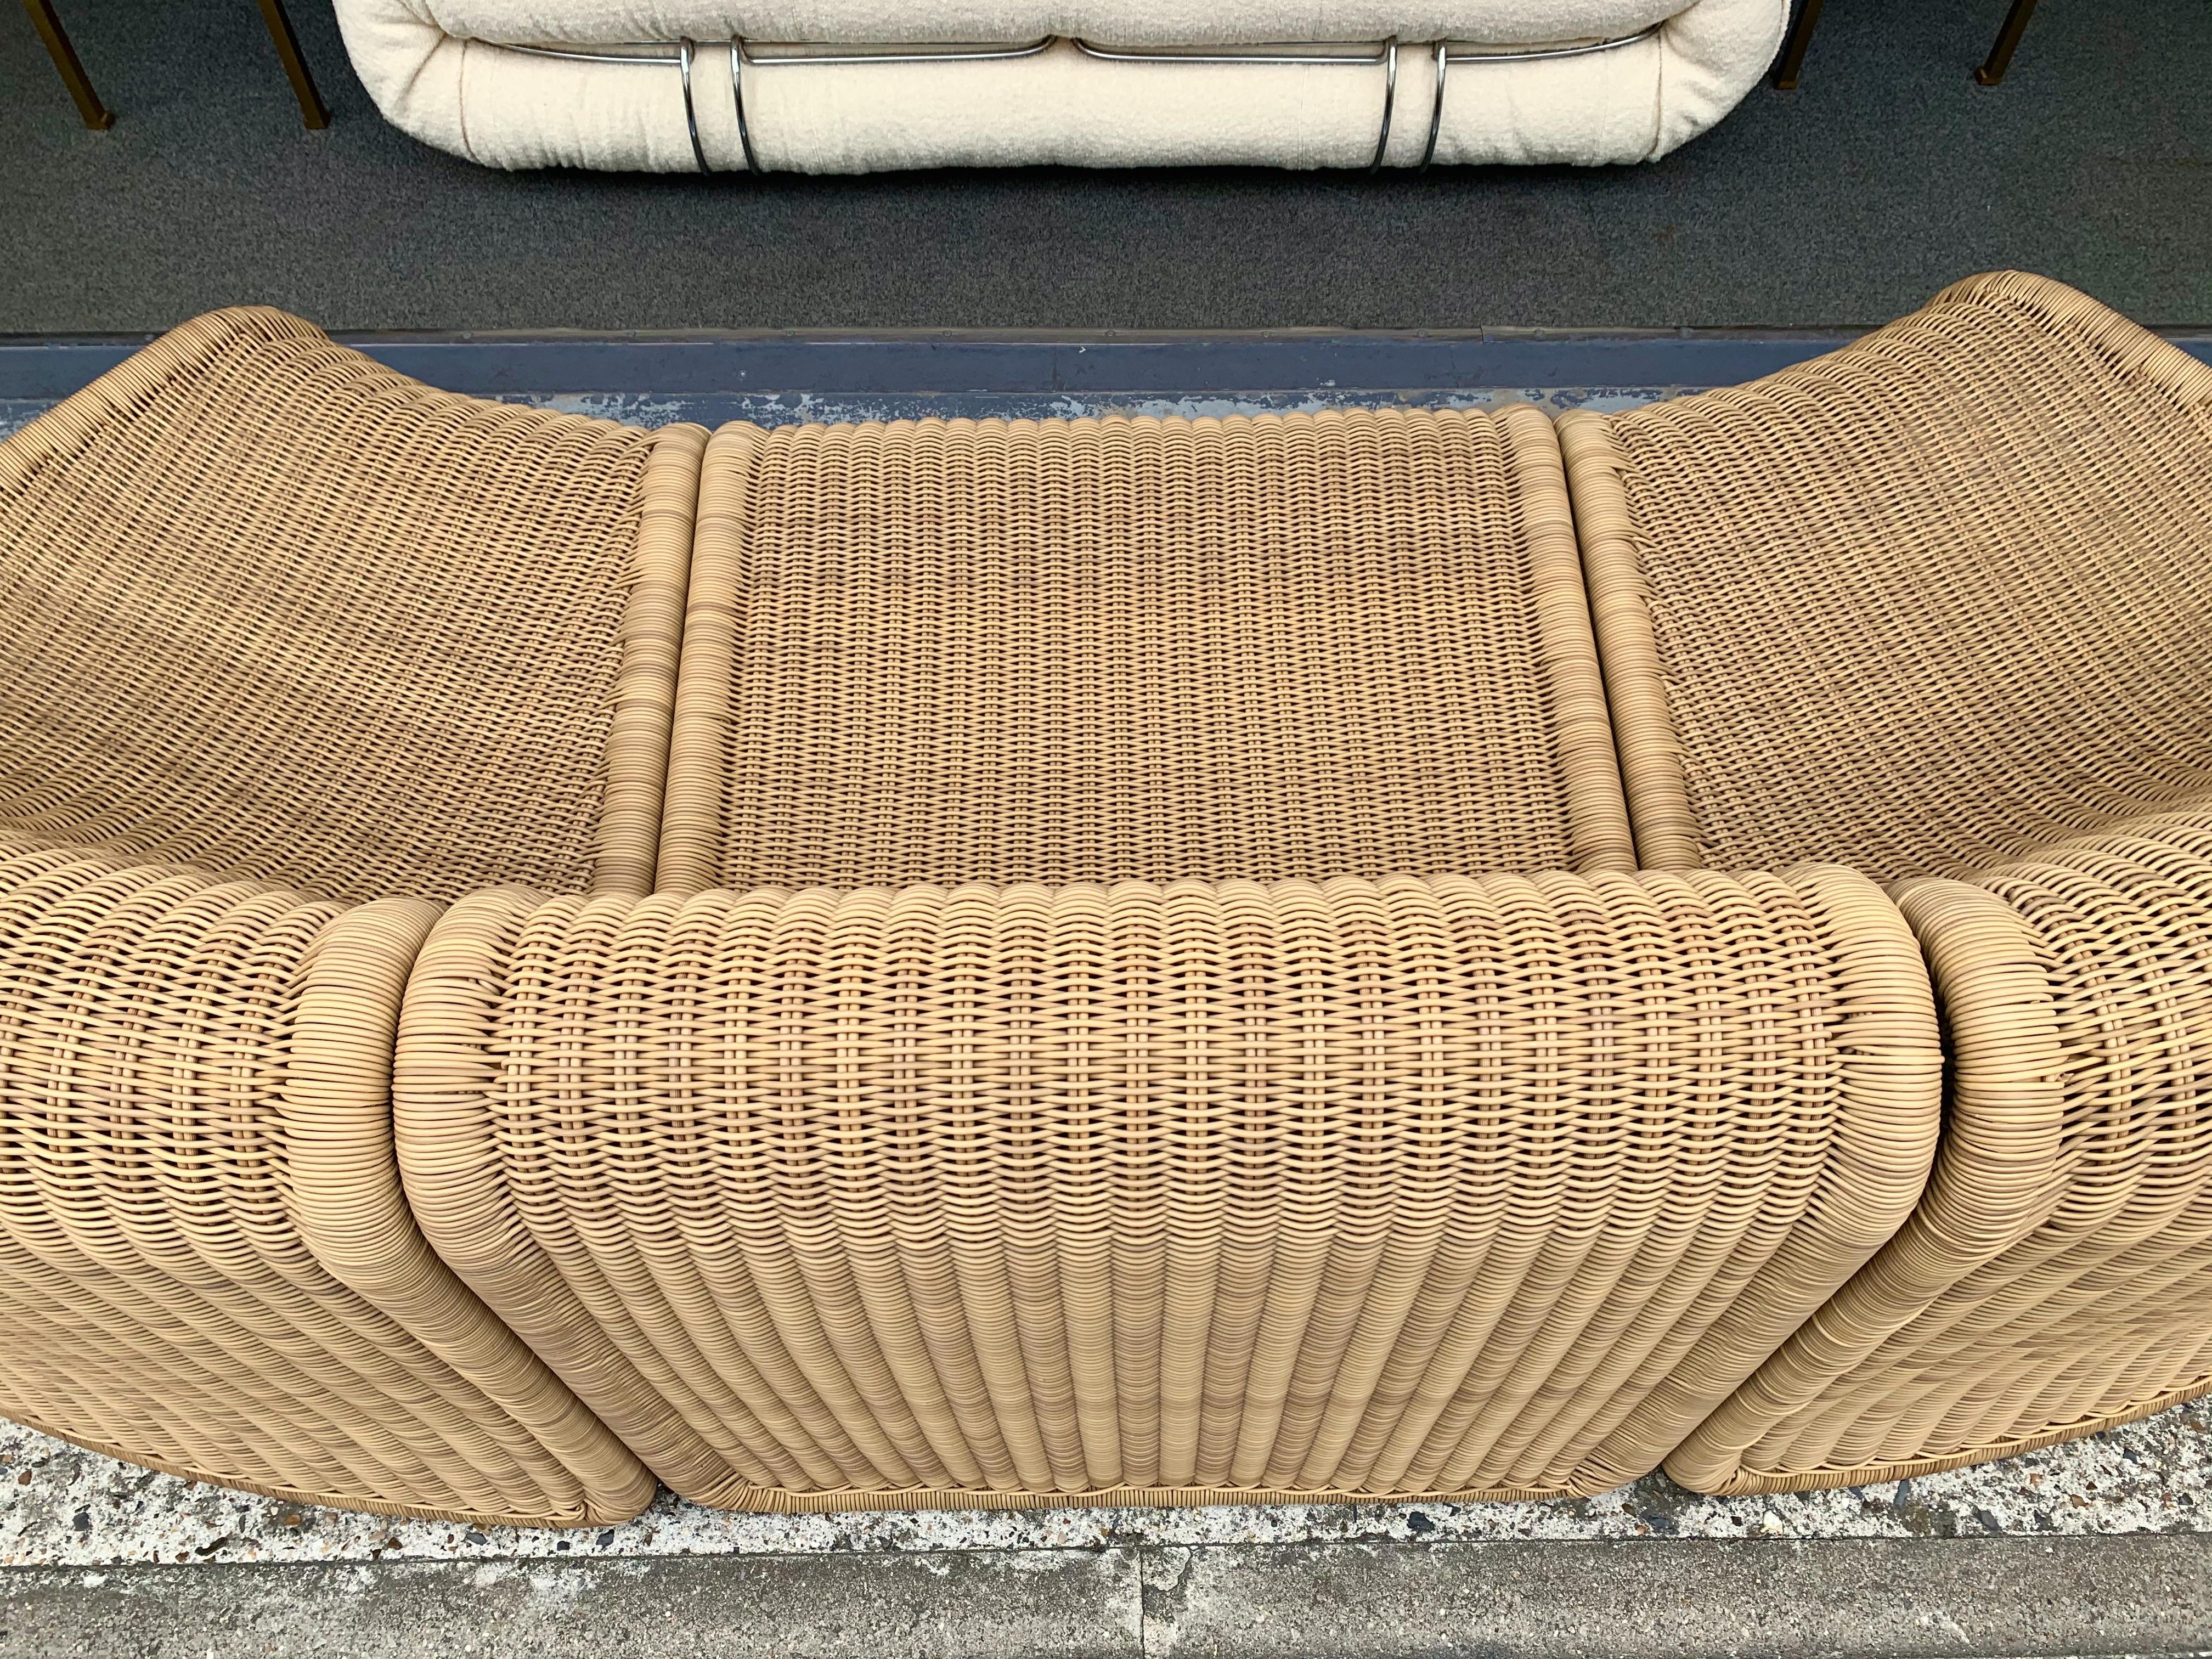 High quality braid synthetic policore rattan very resistant and perfect for outdoor. Modular sofa couch settee or a set of armchairs lounge slipper chair a variant of model P3 by the designer Tito Agnoli. Famous design like Gio Ponti, Gianfranco